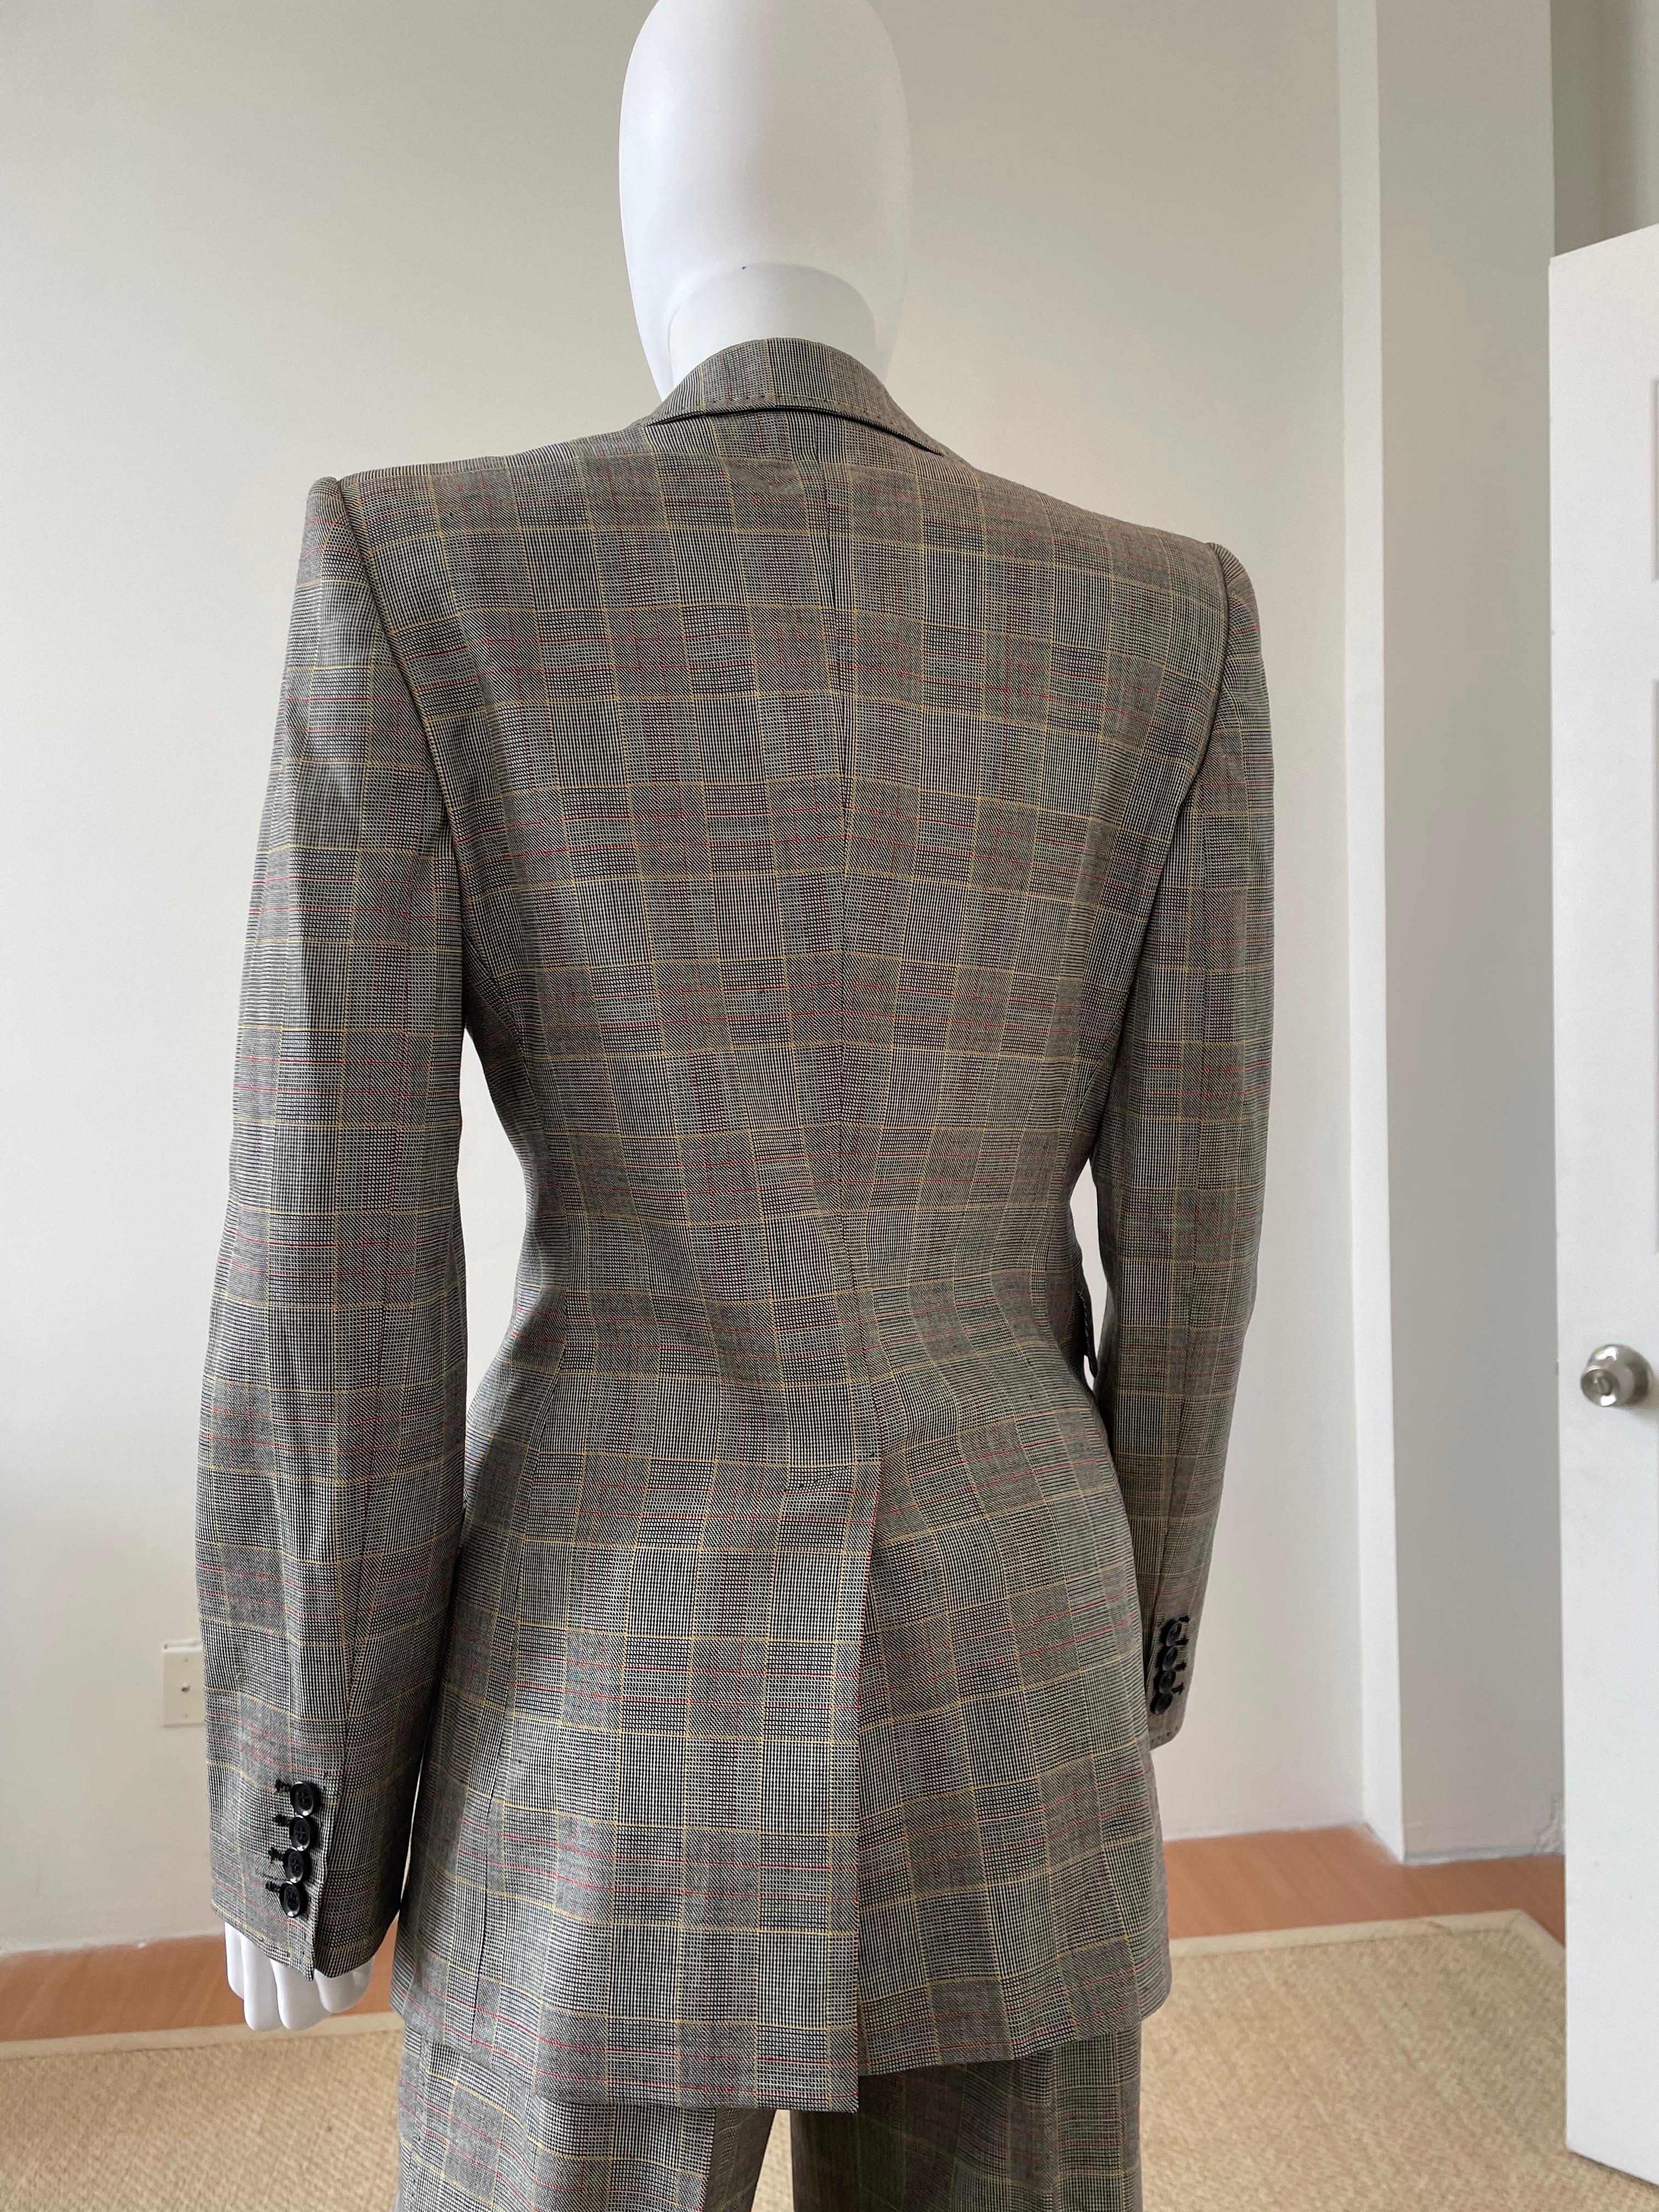 Dolce and Gabbana Wool Plaid Peak Lapel Blazer with Matching Pants Suit In Good Condition For Sale In Brooklyn, NY